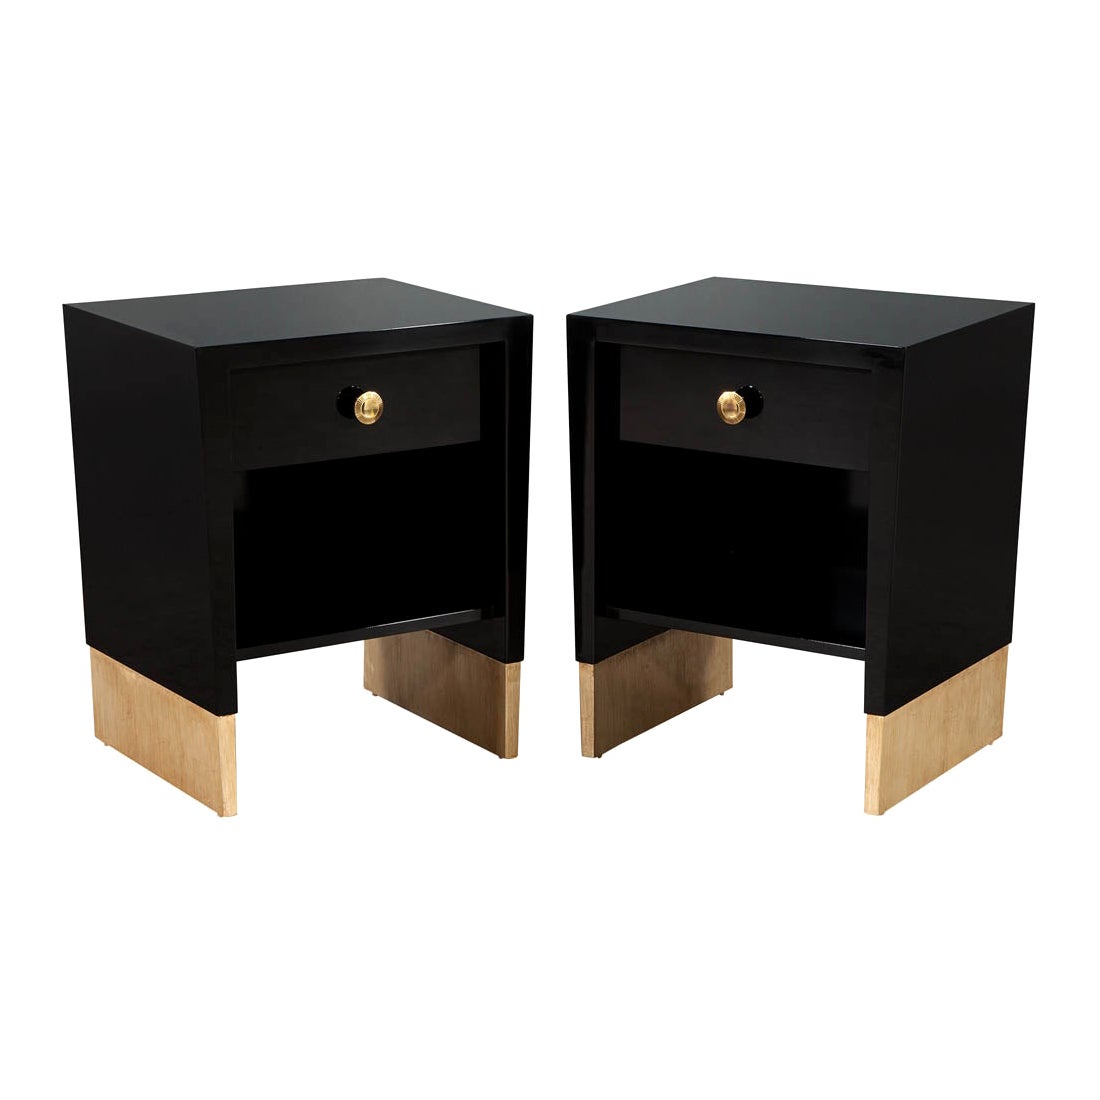 Pair of Custom Black Lacquered Nightstand End Tables